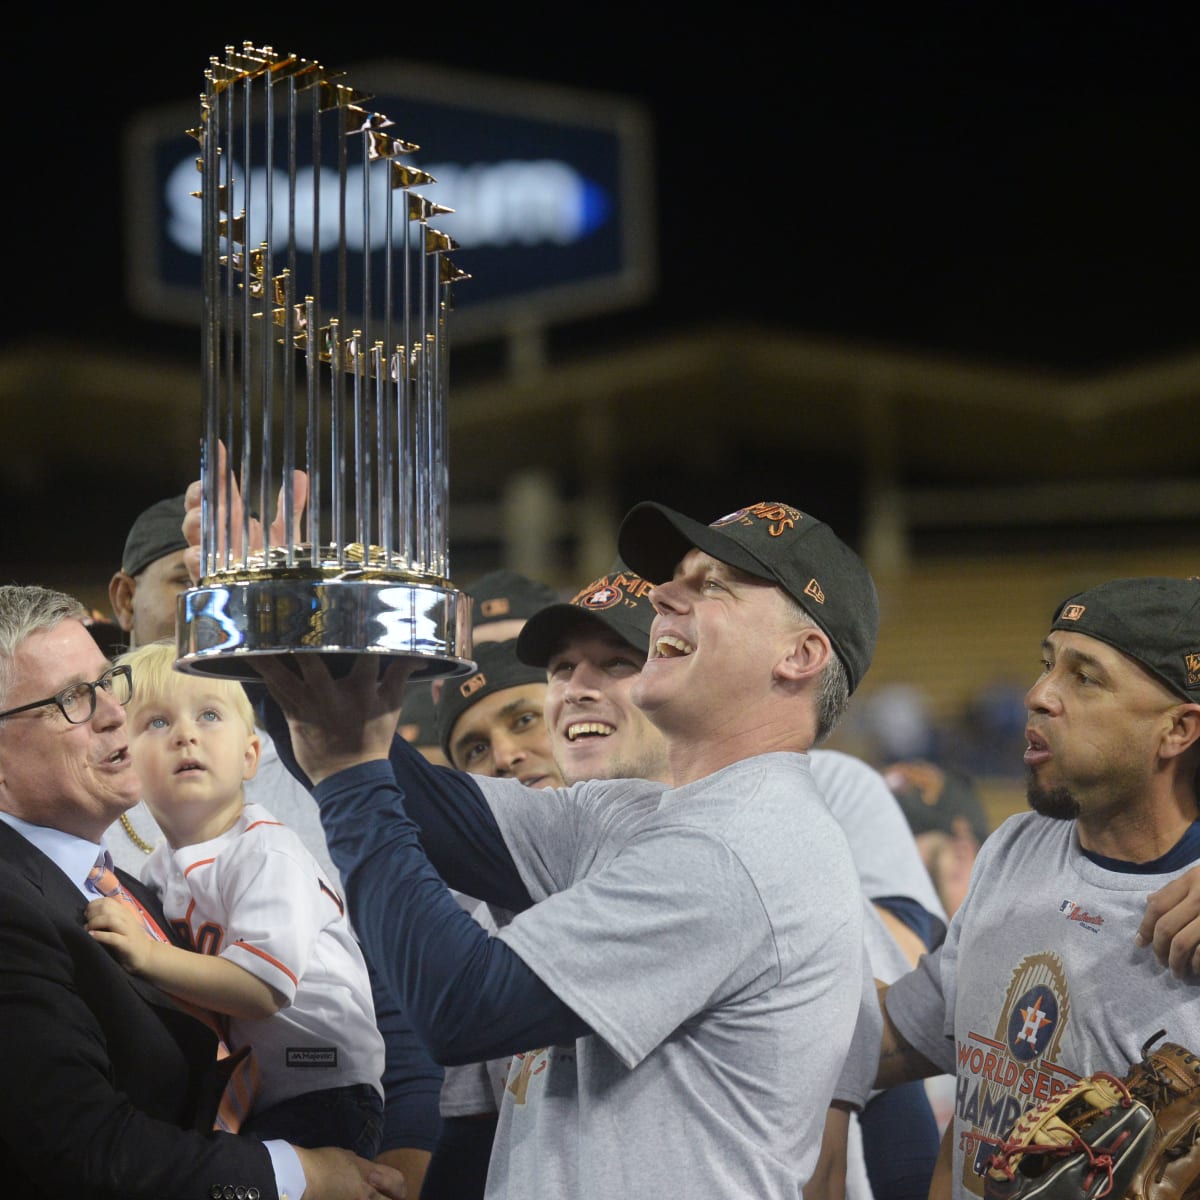 Will the Astros be stripped of their 2017 World Series championship?